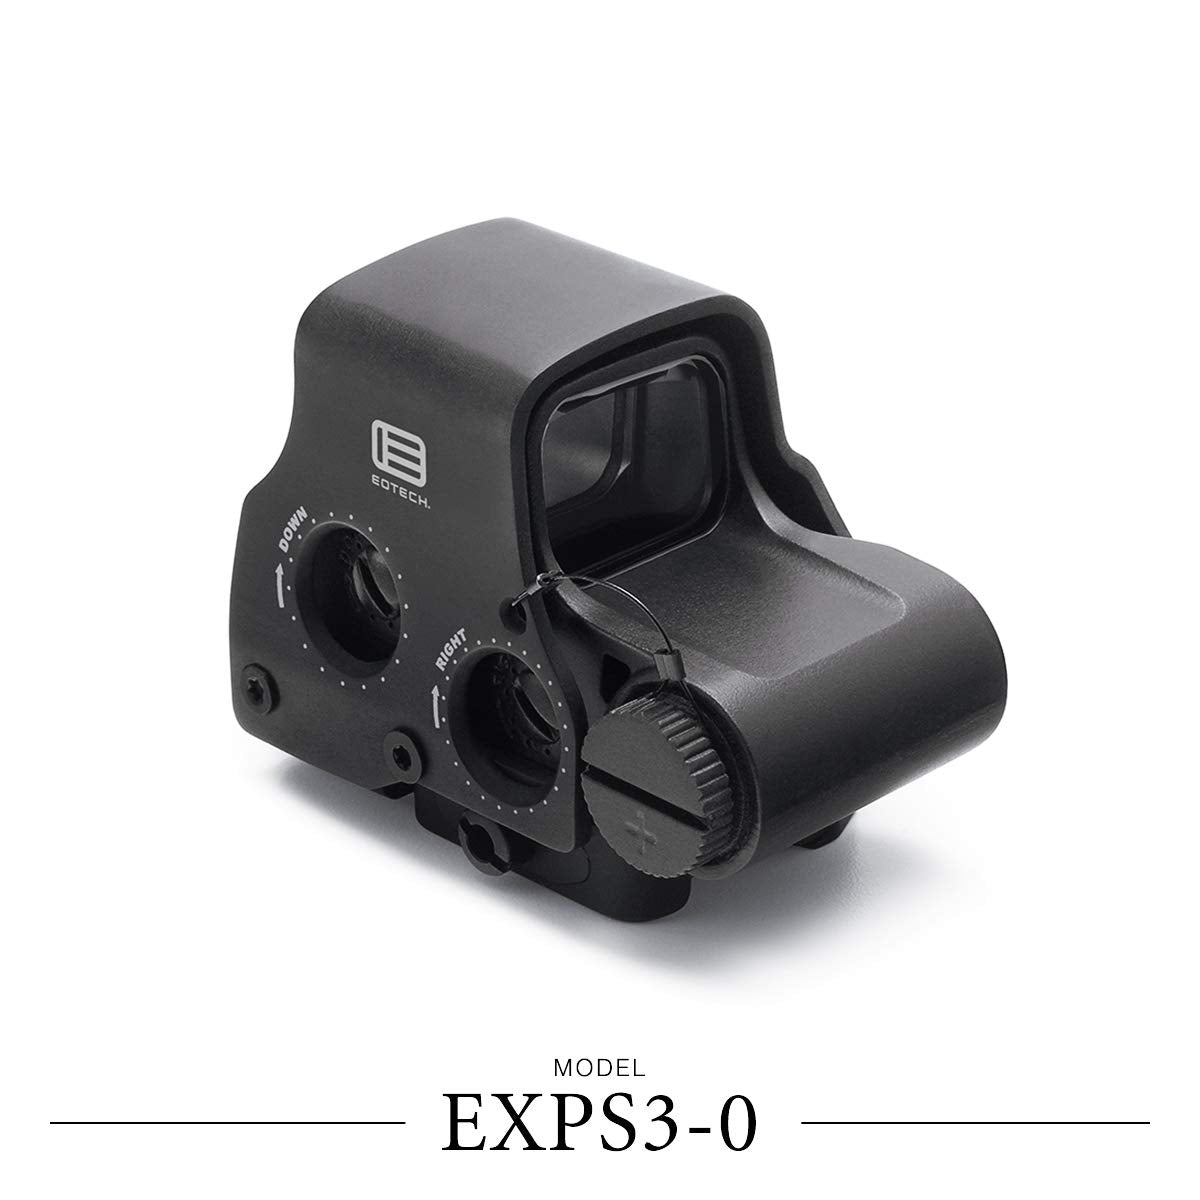 EOTECH Holographic Weapon Sight BLACK68MOA Ring 1 MOA Dot  - EXPS3-0